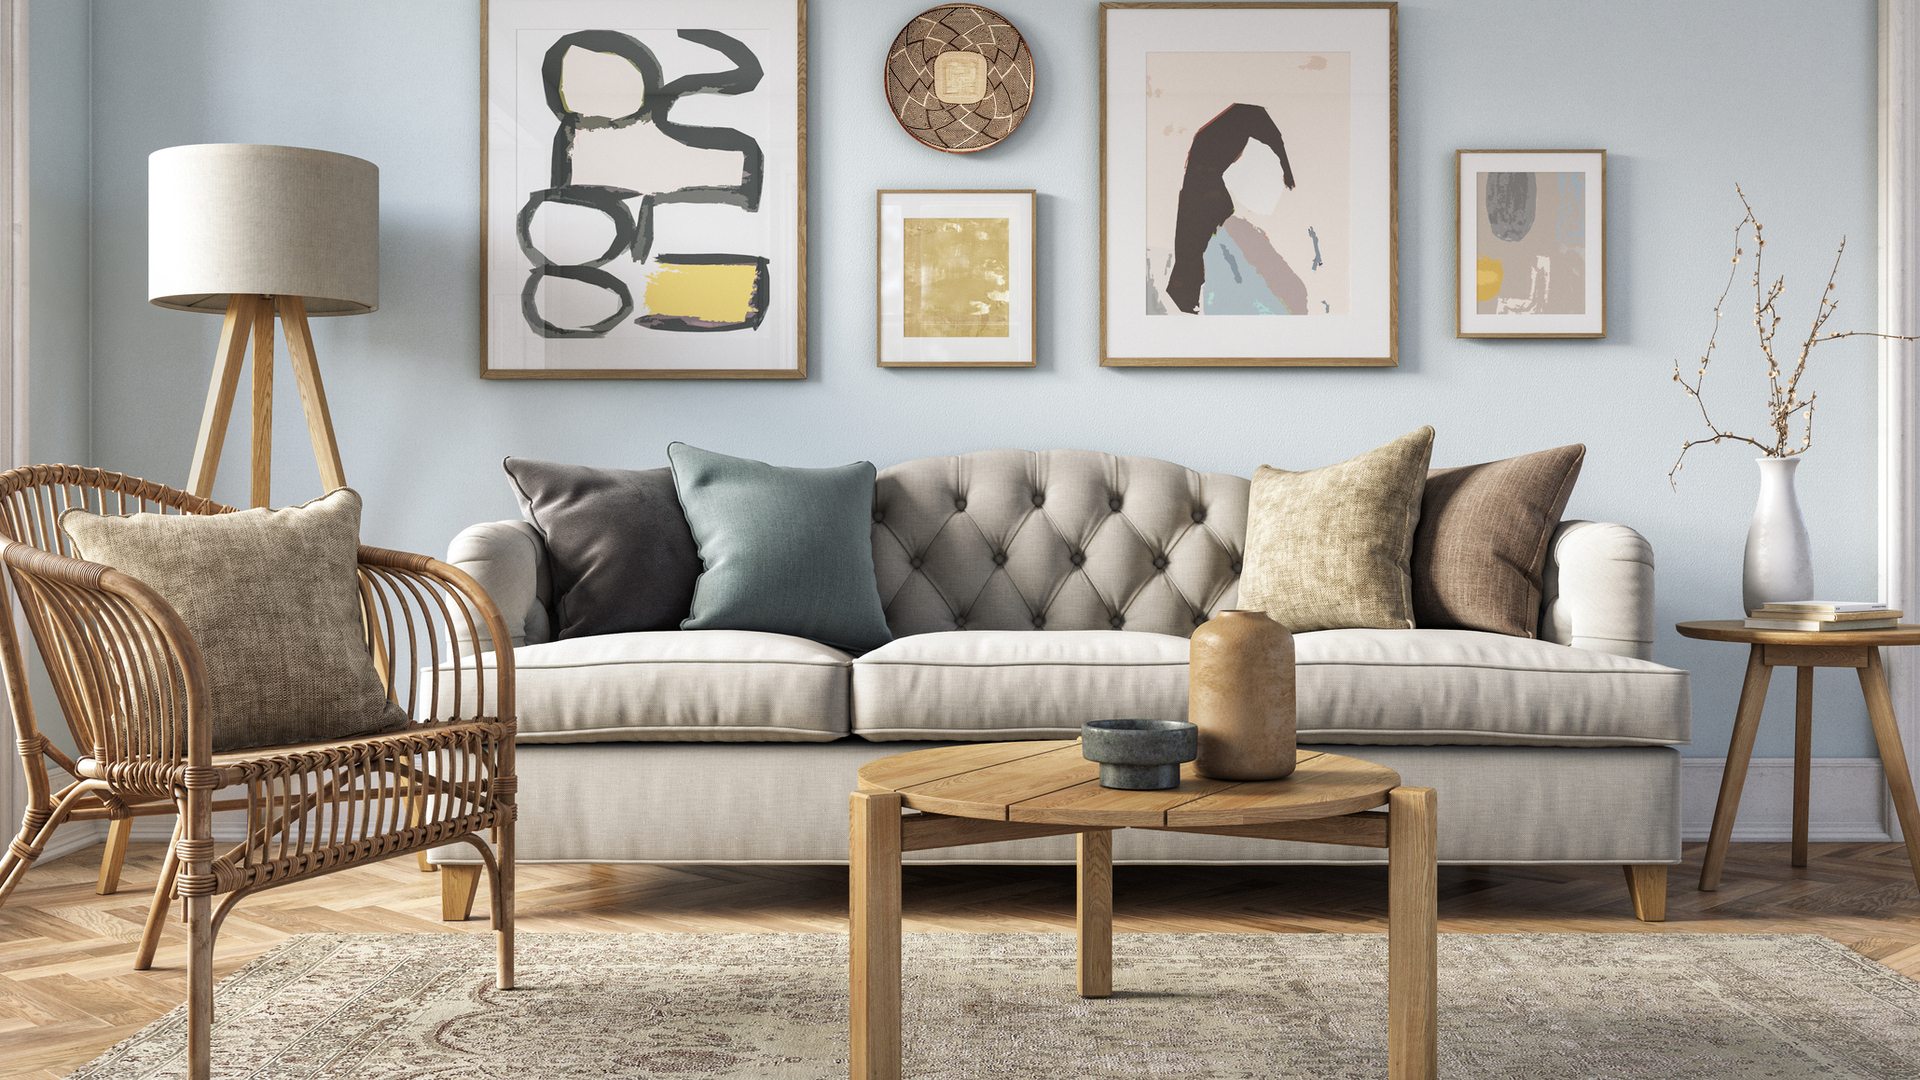 Budget-Luxury: Spruce Up Your Home With These Easy, Cost-Effective Decorating Tips